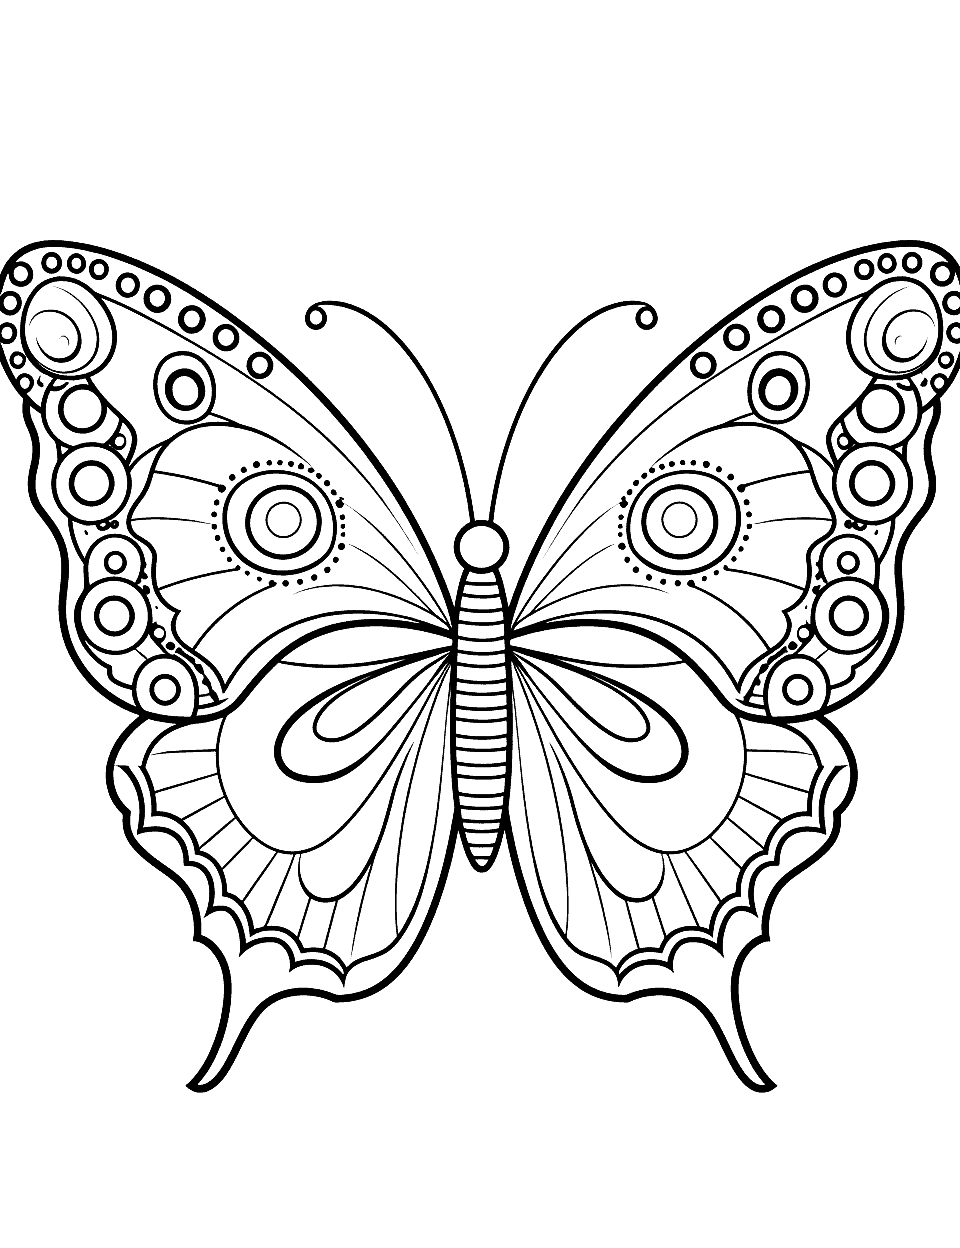 Doodle Butterfly Cute Coloring Page - A whimsical butterfly with intricate doodle patterns on its wings.